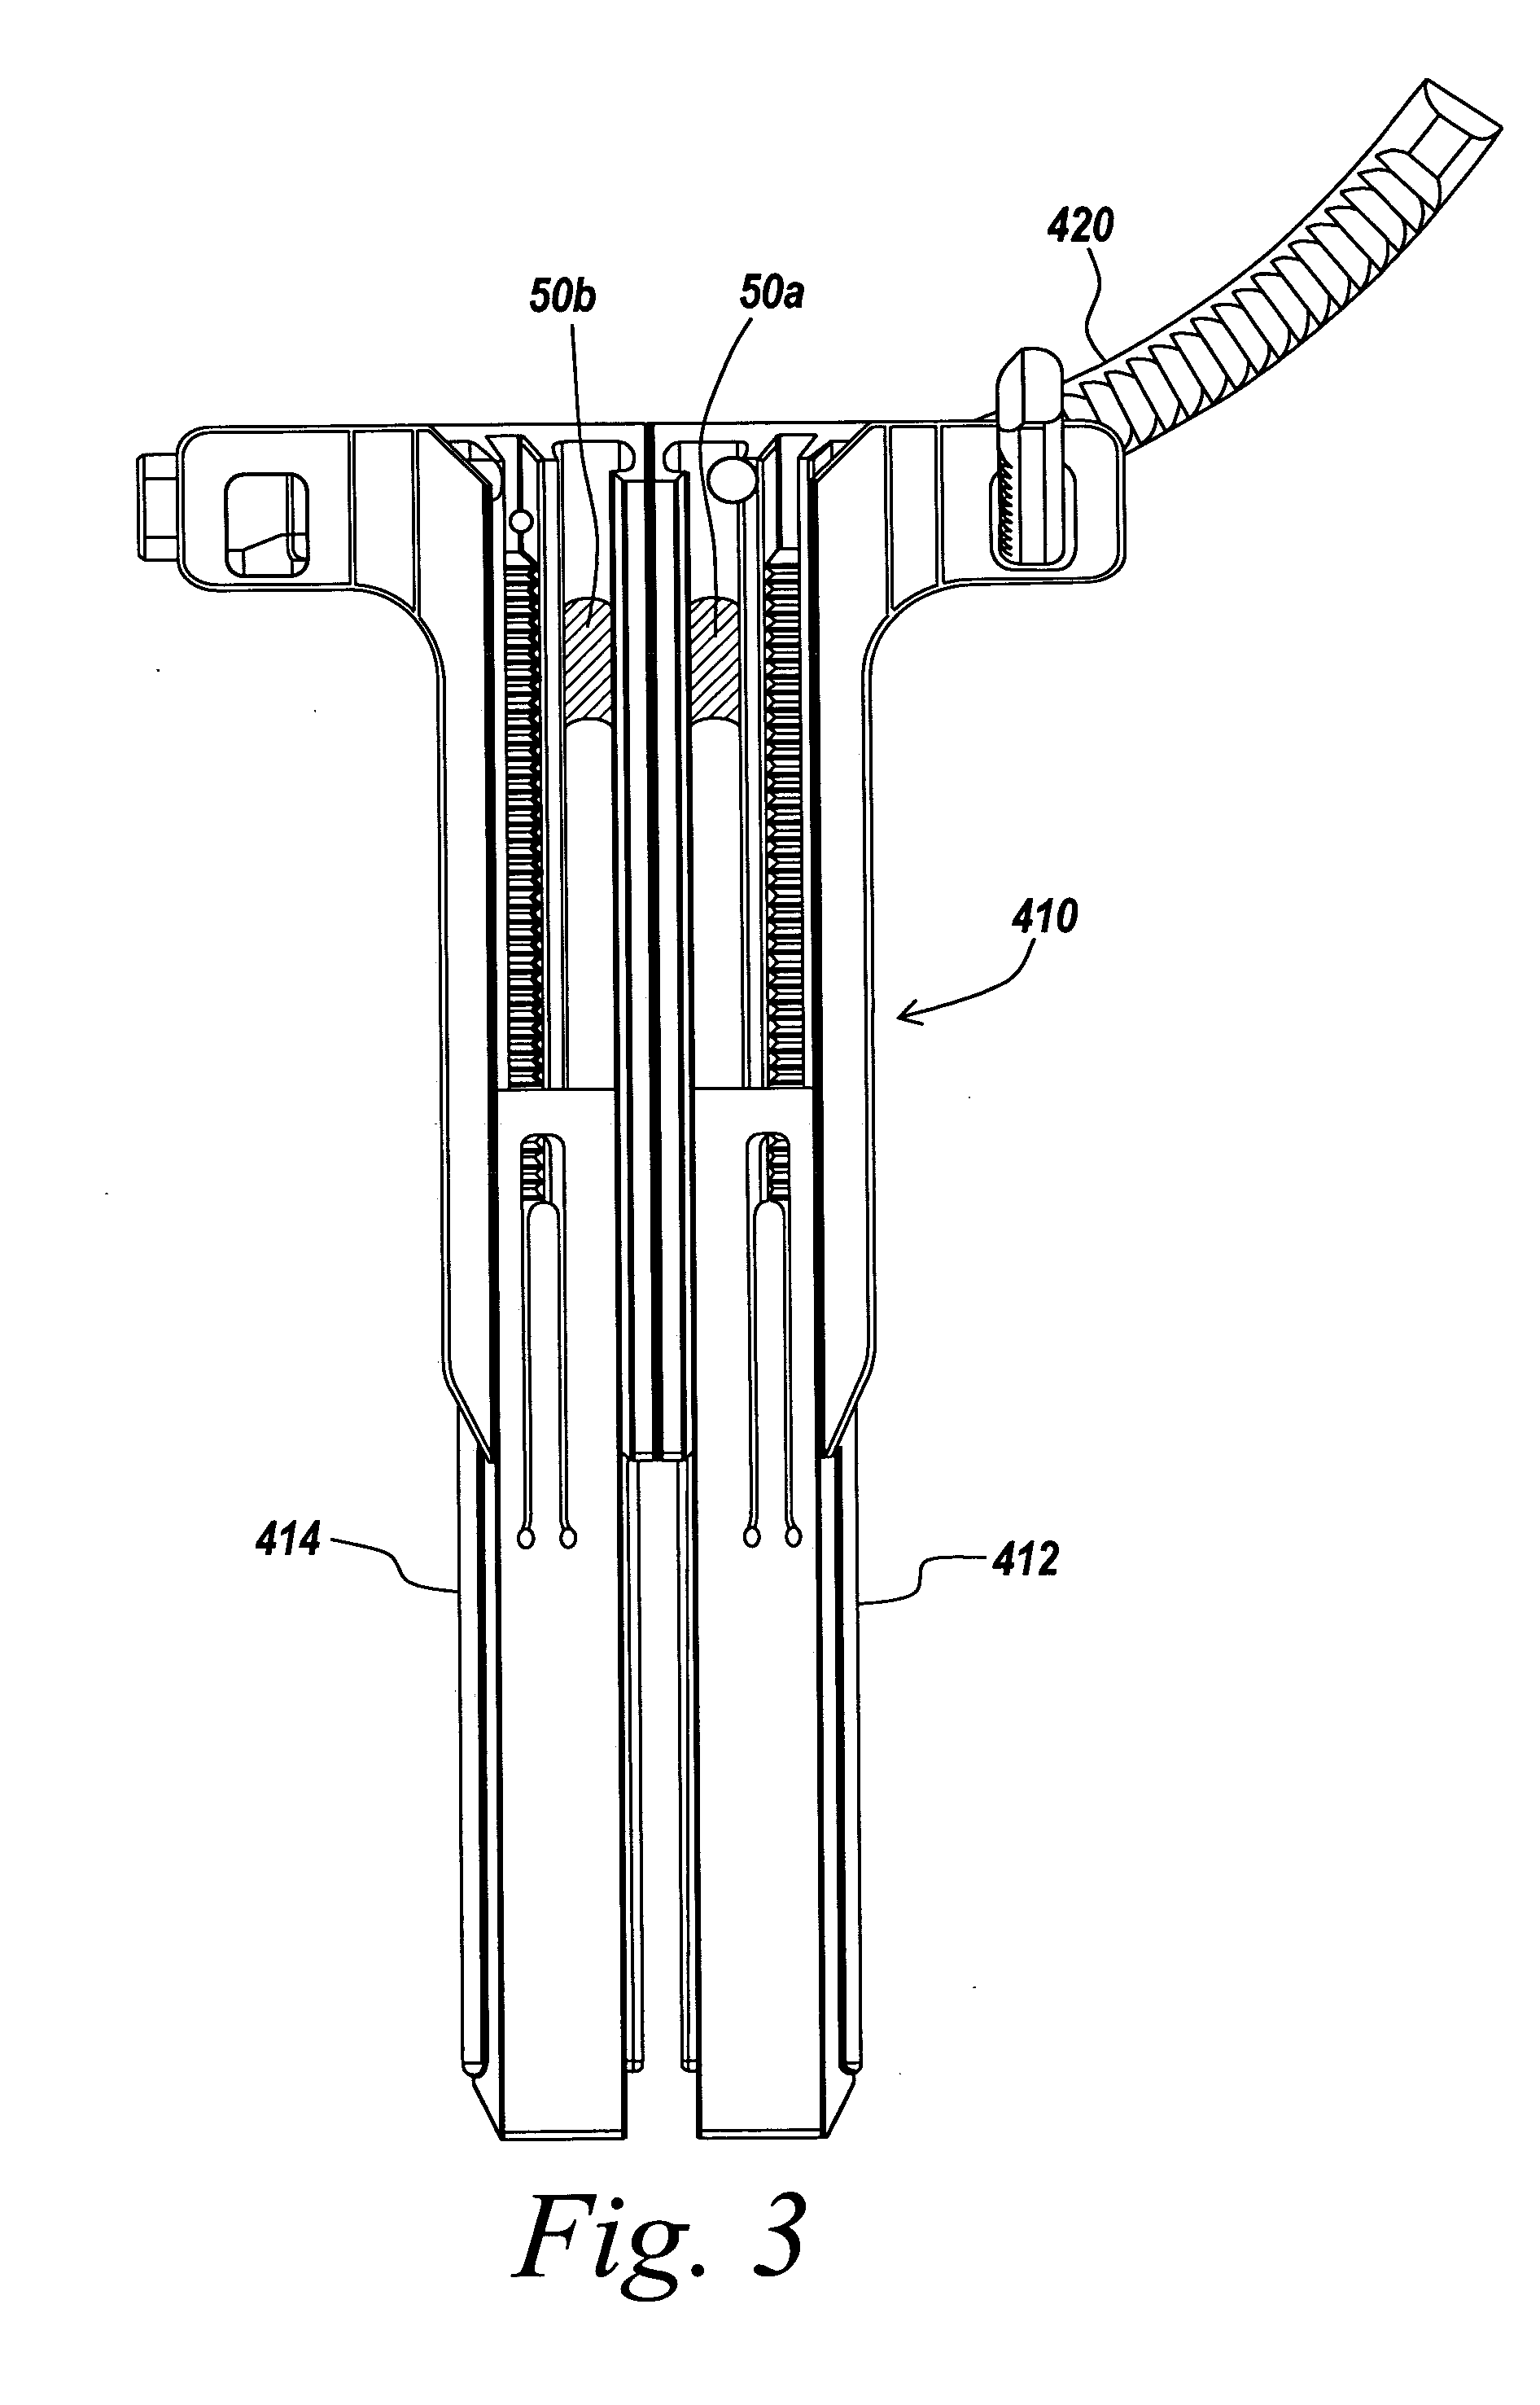 Integrated access device and light source for surgical procedures